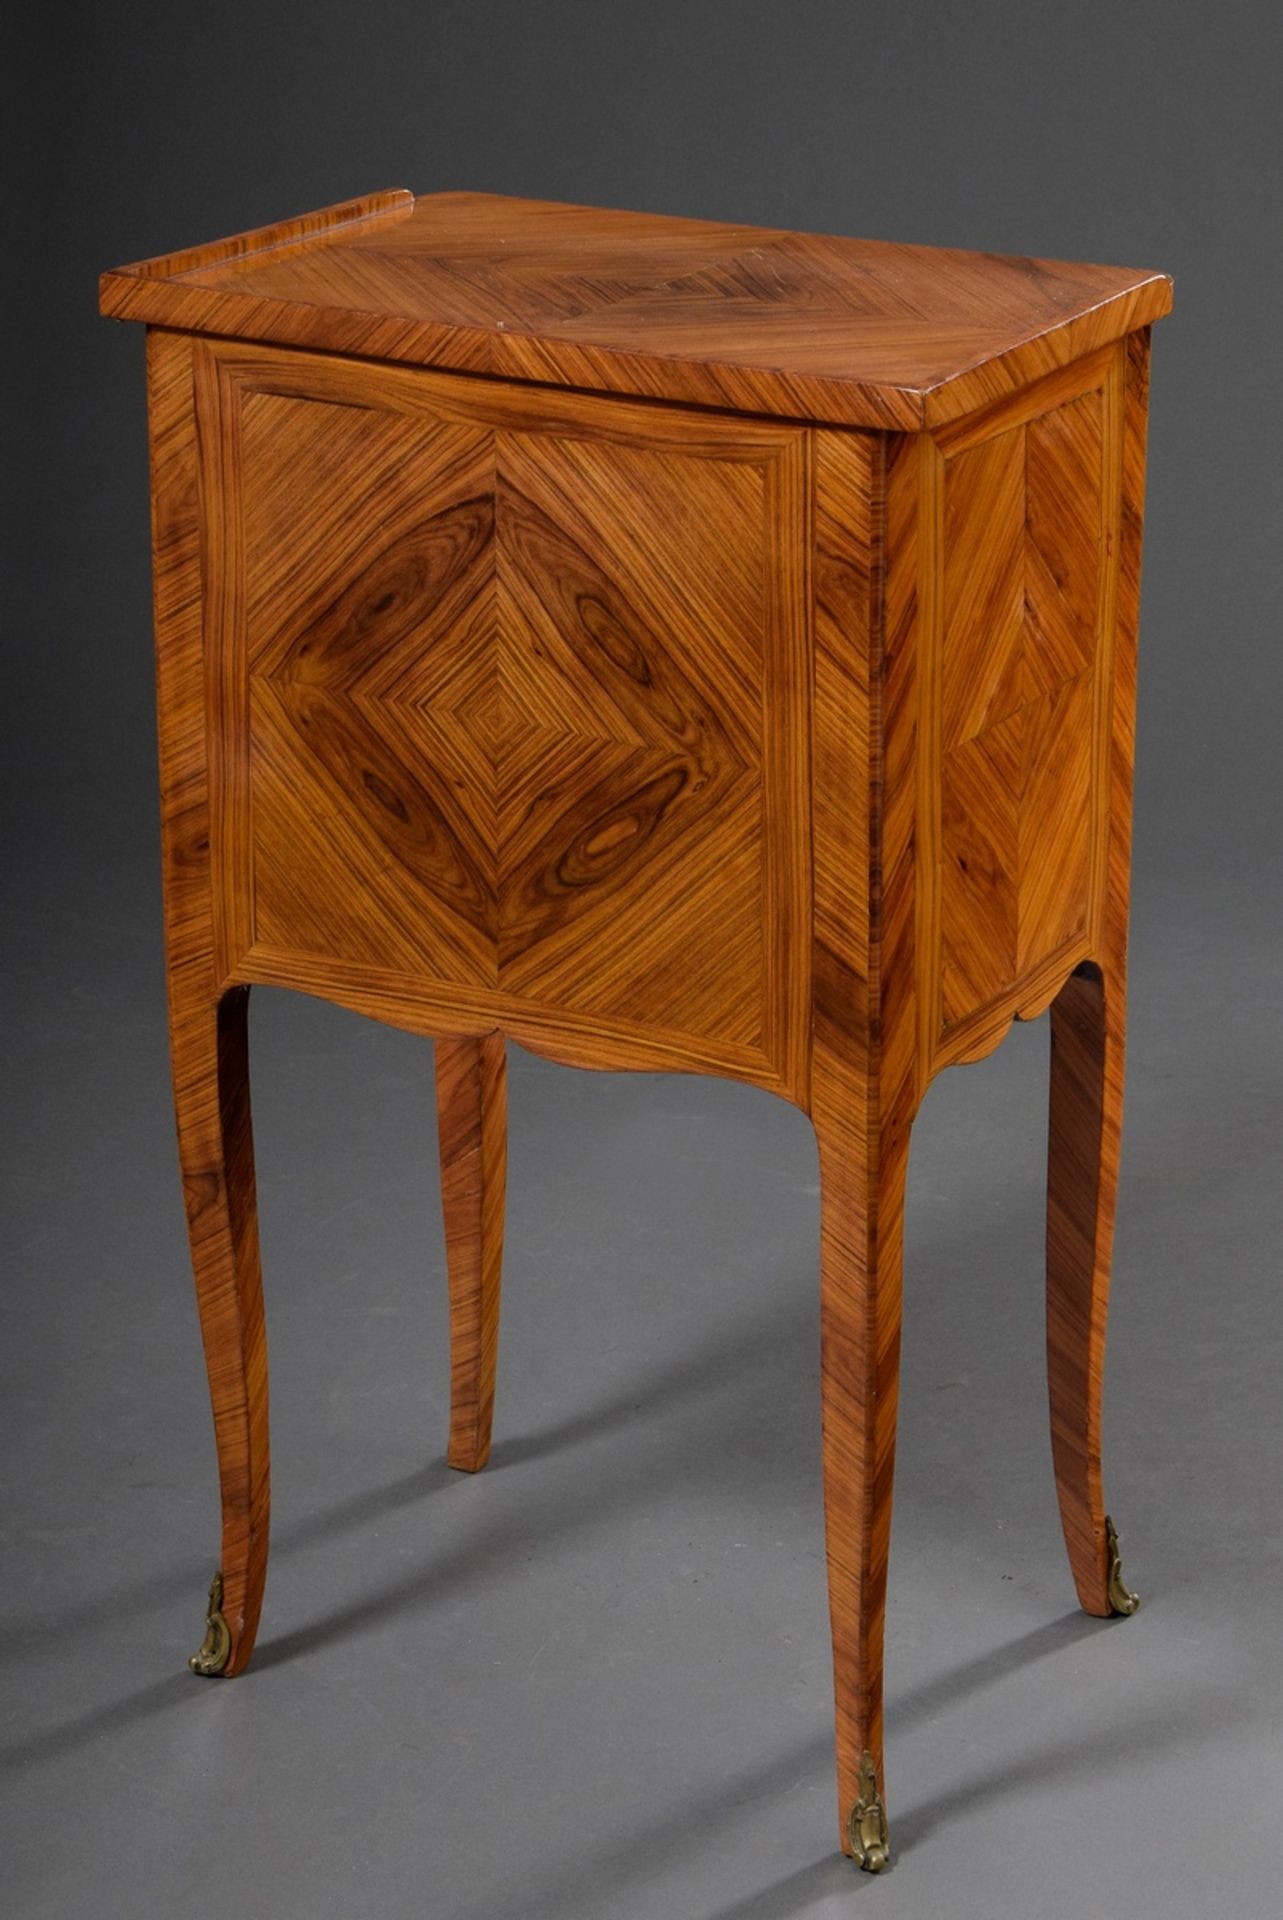 Louis XVI "Table Tricoteuse" with drawer in the frame and roll-up door, geometric rosewood marquetr - Image 7 of 7